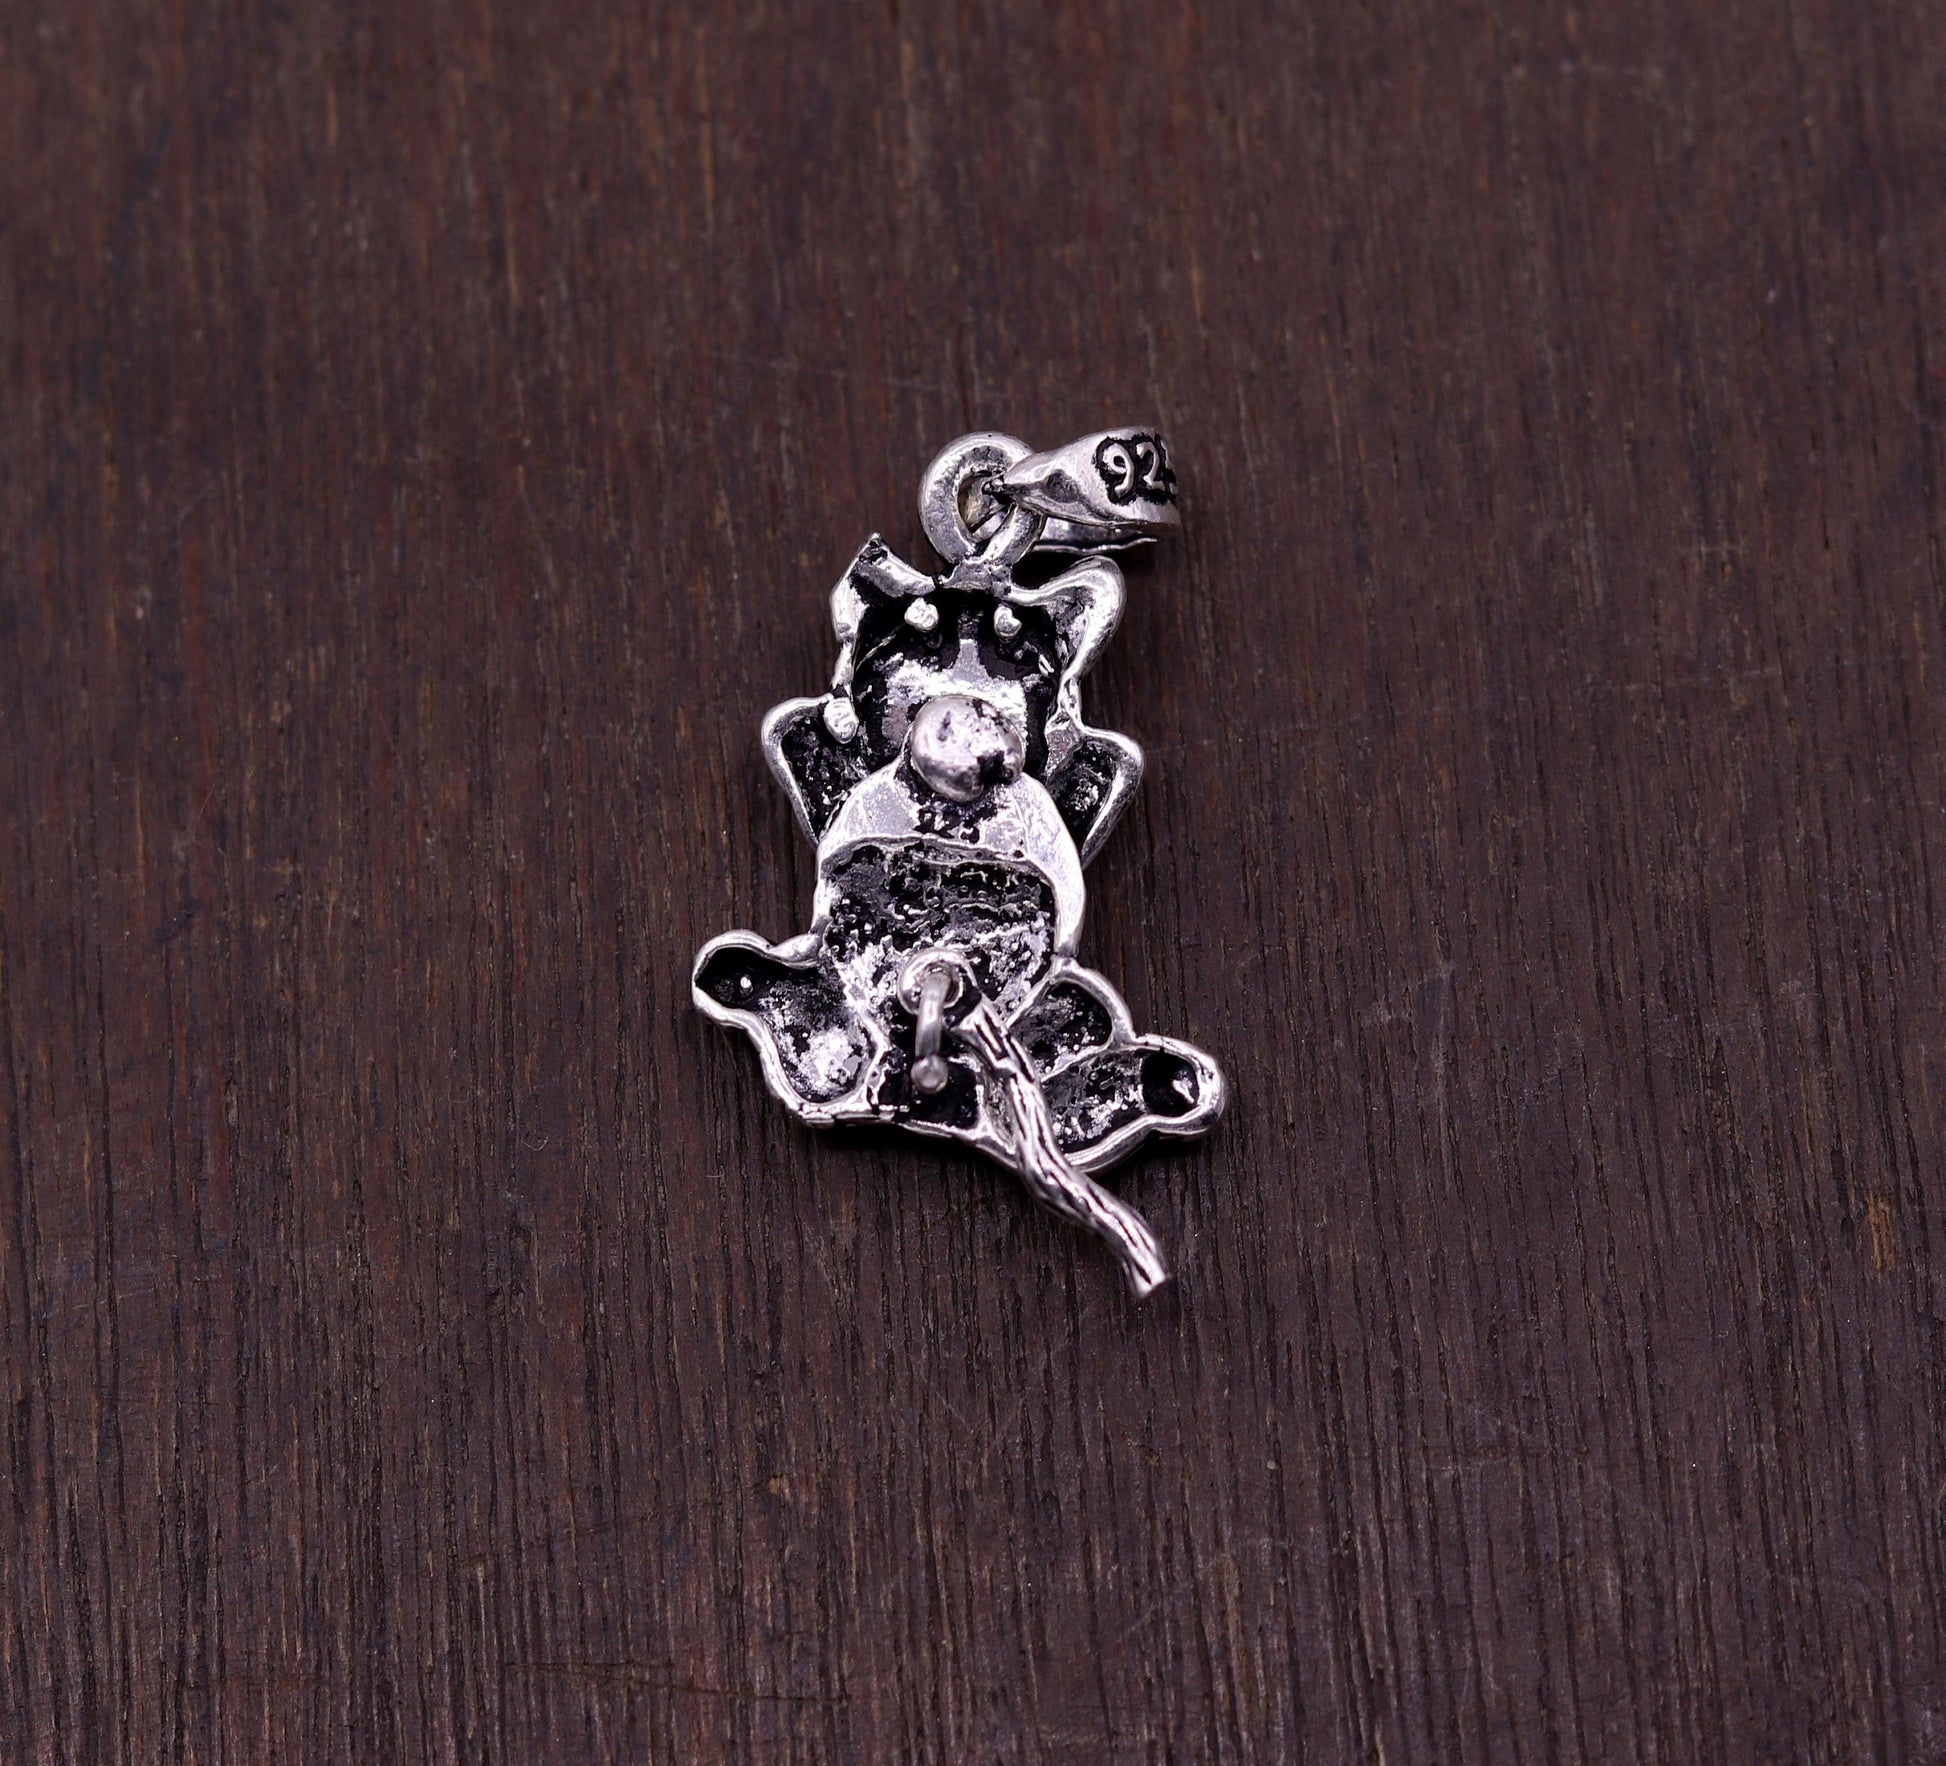 Amazing 925 sterling silver handcrafted fabulous animal cat pendant excellent stylish modern unisex gifting jewelry from india nsp219 - TRIBAL ORNAMENTS